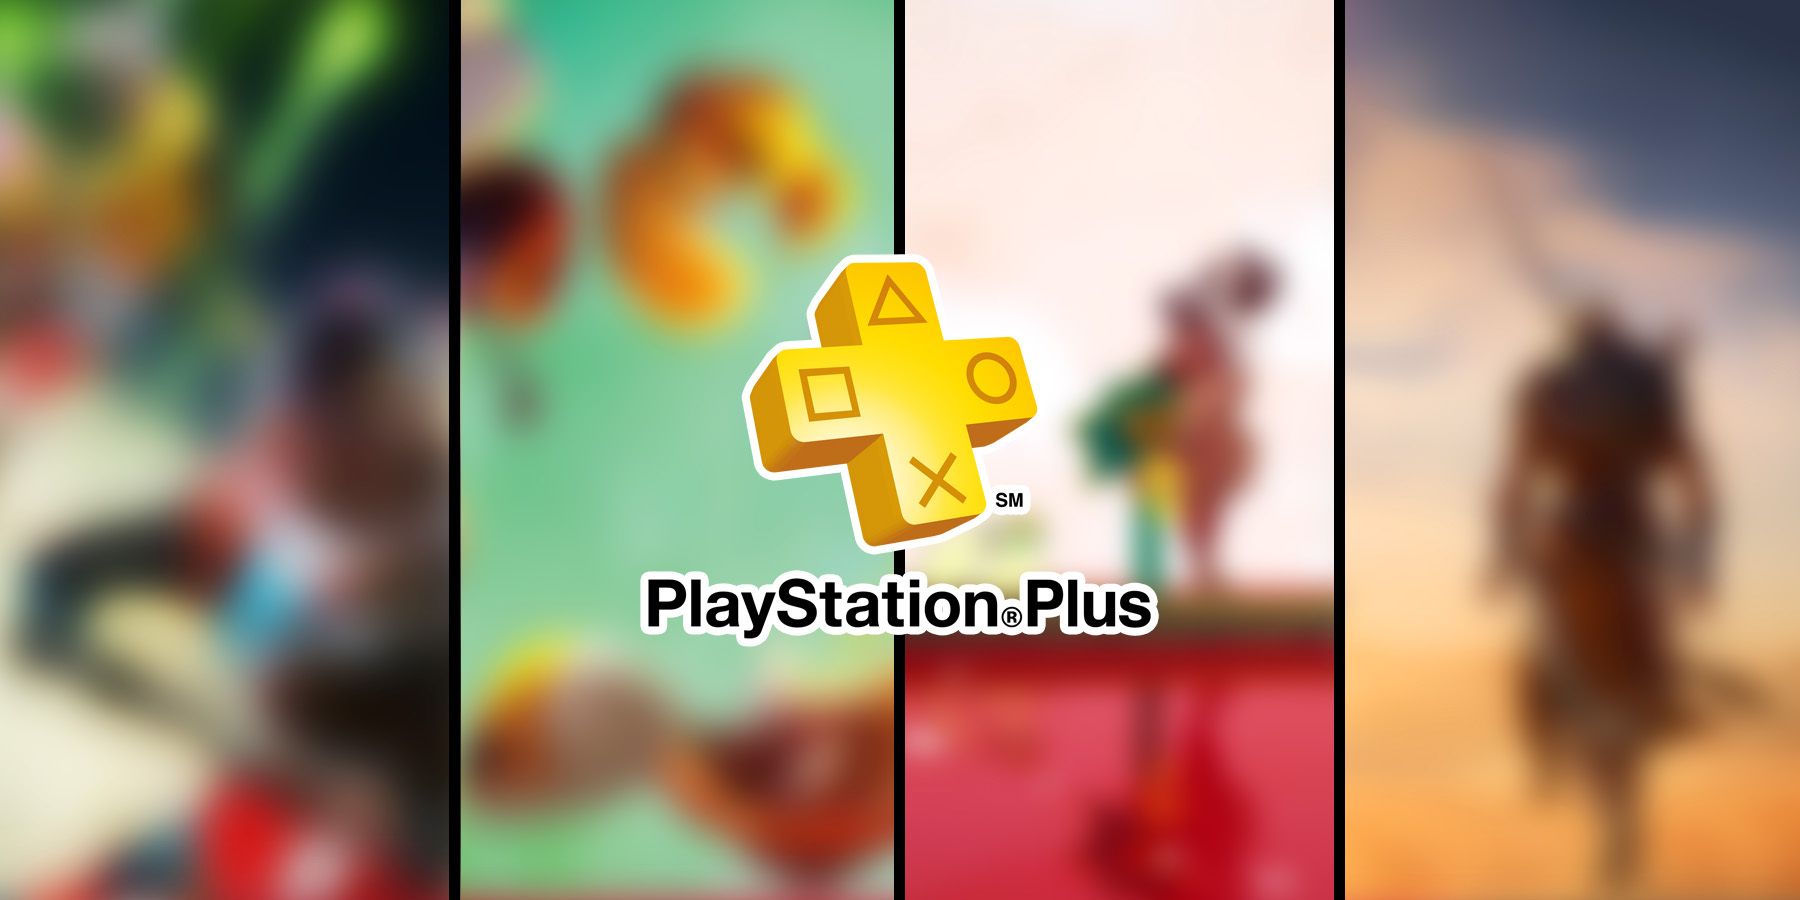 Every PlayStation Plus Extra & Premium Game Available September 2022